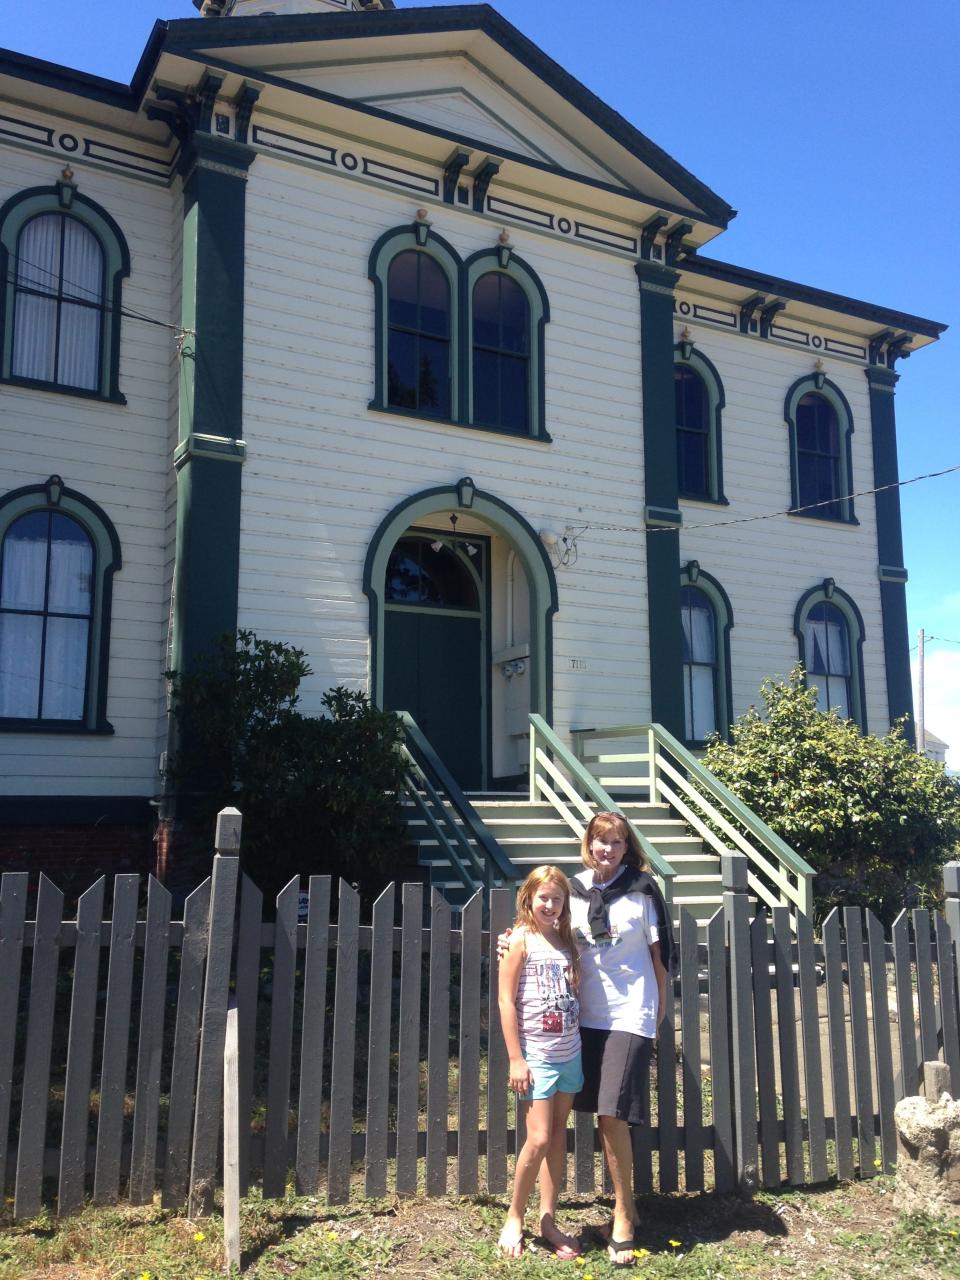 Granddaughter Jessica and spouse Susan in front of the old Bodega School made famous in the movie “The Birds."